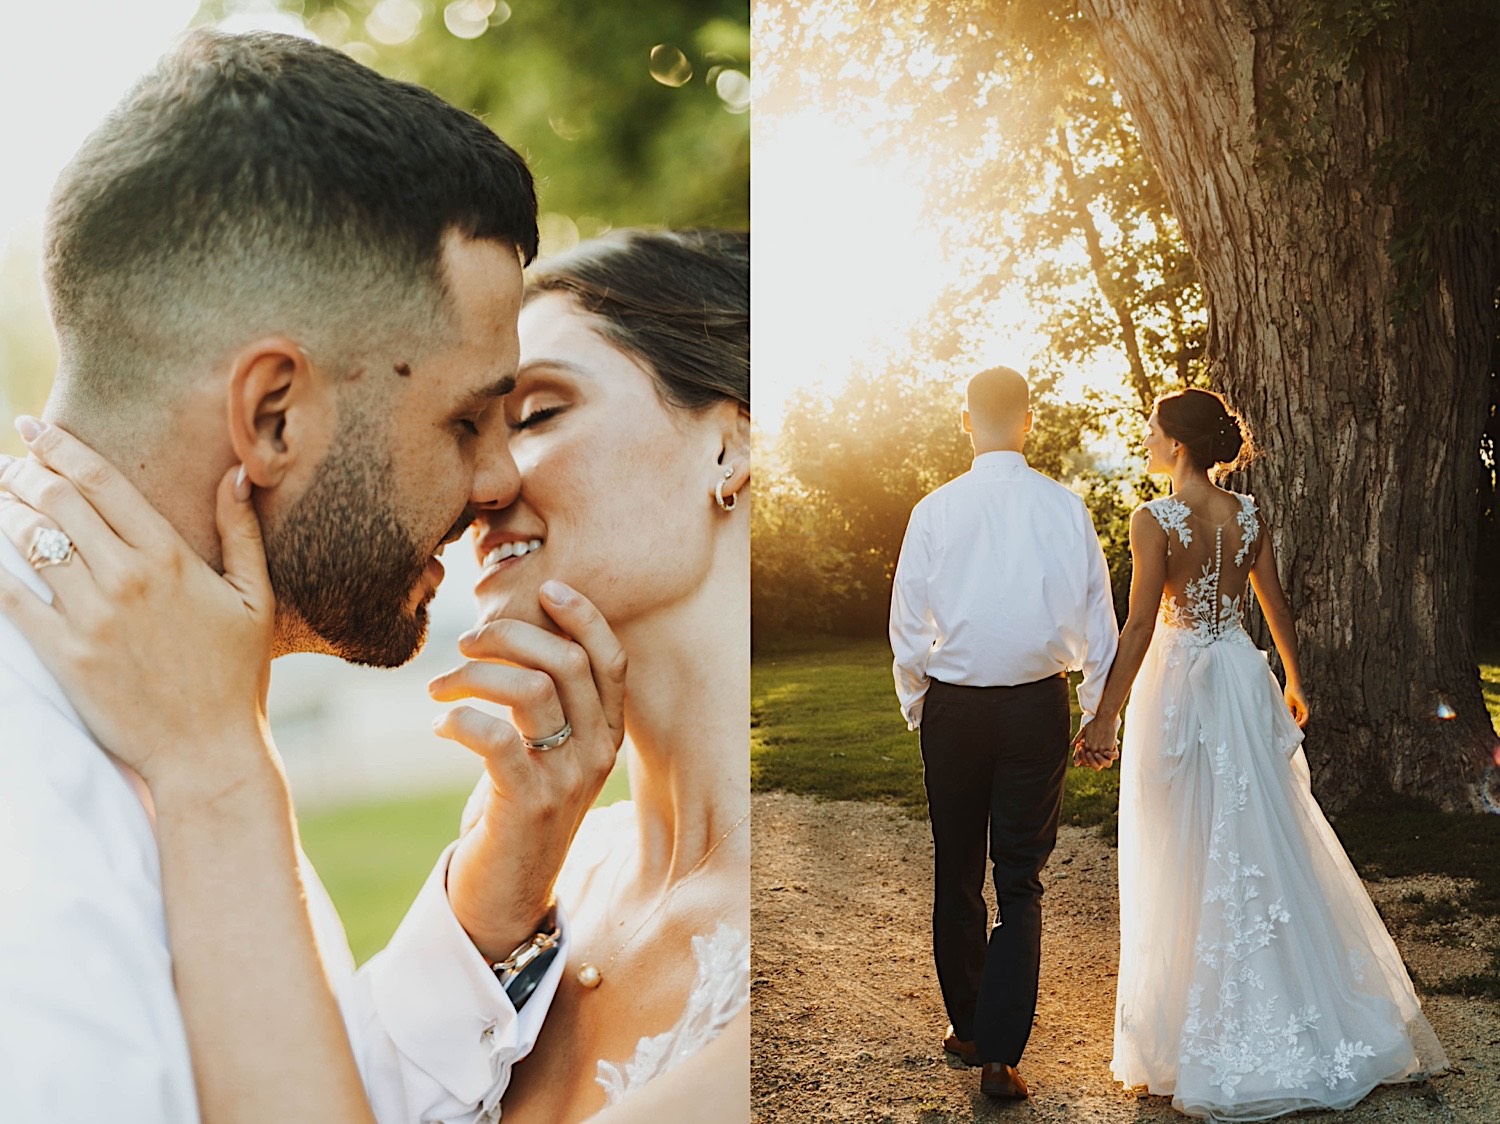 2 photos side by side, the left is of a bride and groom about to kiss one another at sunset, the right is of the same couple walking towards the sunset away from the camera